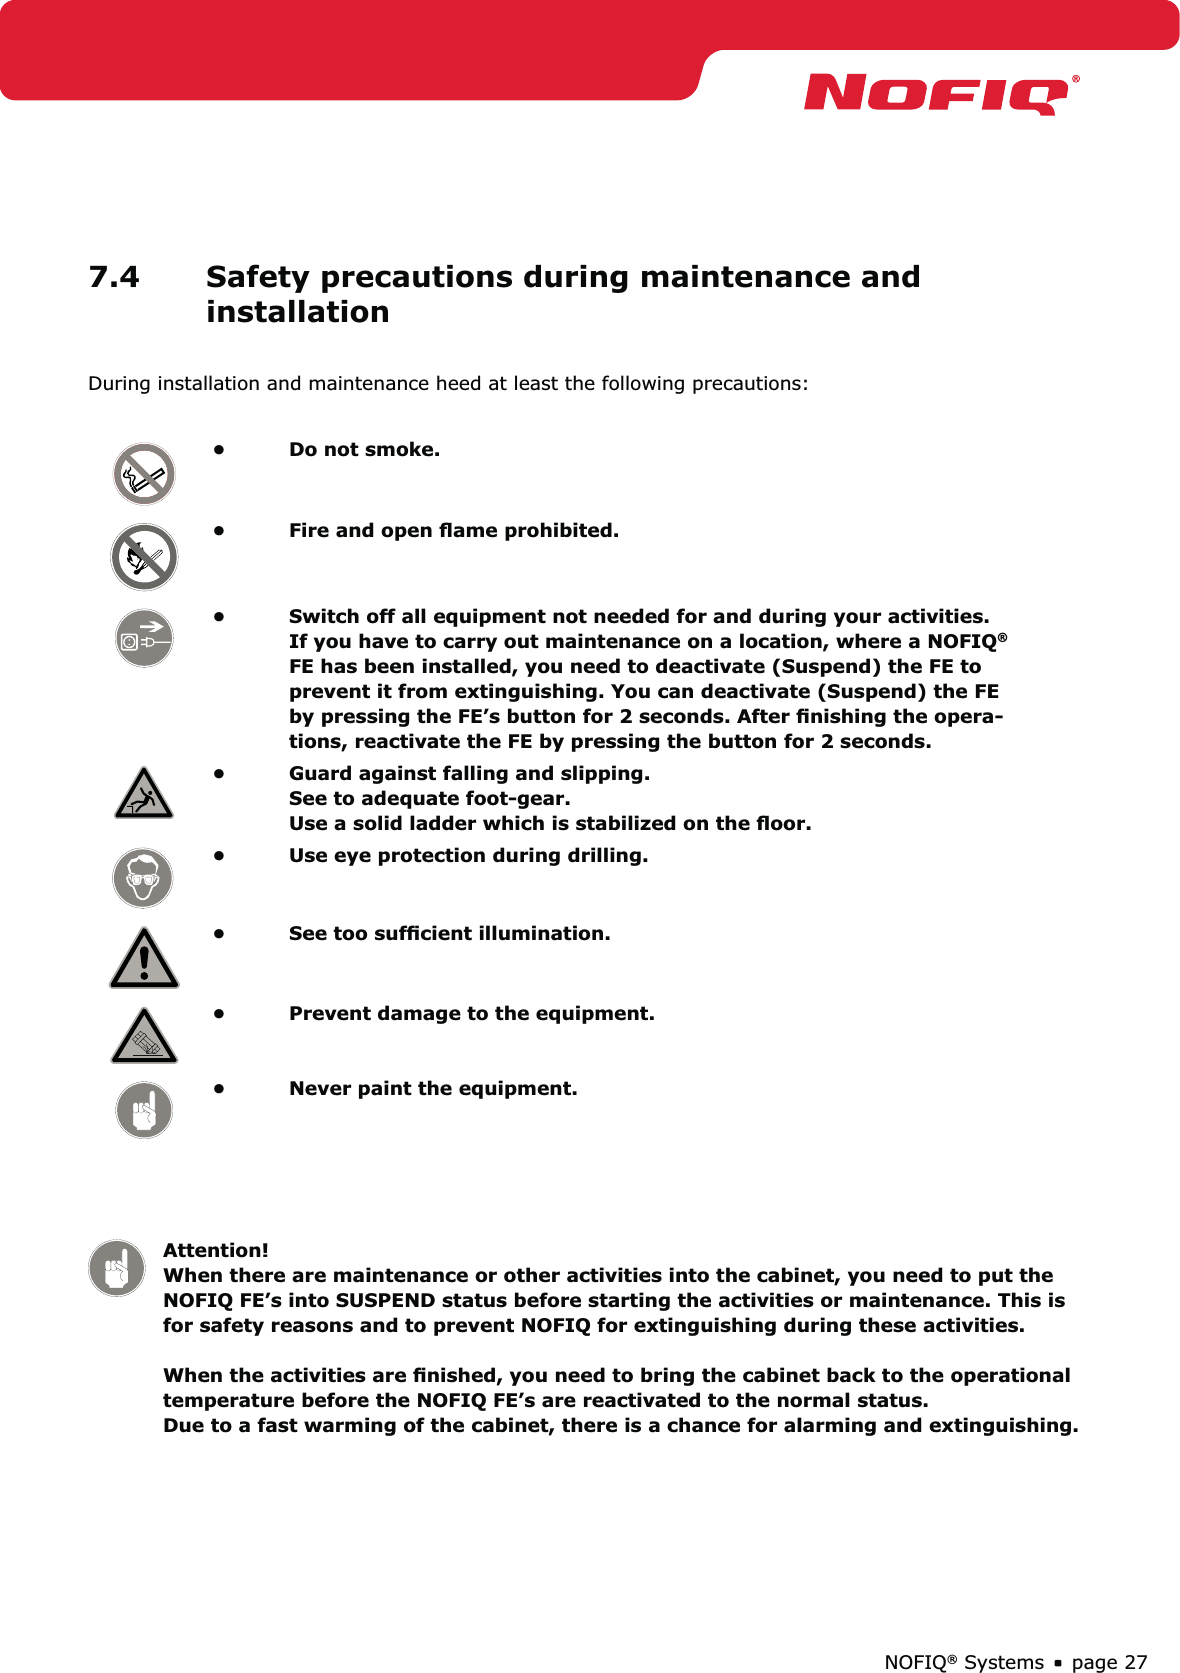 page 27NOFIQ® Systems7.4  Safety precautions during maintenance and installationDuring installation and maintenance heed at least the following precautions:Do not smoke.• Fire and open ﬂame prohibited.• Switch off all equipment not needed for and during your activities. • If you have to carry out maintenance on a location, where a NOFIQ® FE has been installed, you need to deactivate (Suspend) the FE to prevent it from extinguishing. You can deactivate (Suspend) the FE by pressing the FE’s button for 2 seconds. After ﬁnishing the opera-tions, reactivate the FE by pressing the button for 2 seconds.Guard against falling and slipping. • See to adequate foot-gear. Use a solid ladder which is stabilized on the ﬂoor.Use eye protection during drilling.• See too sufﬁcient illumination.• Prevent damage to the equipment.• Never paint the equipment.•  Attention!   When there are maintenance or other activities into the cabinet, you need to put the    NOFIQ FE’s into SUSPEND status before starting the activities or maintenance. This is    for safety reasons and to prevent NOFIQ for extinguishing during these activities.     When the activities are ﬁnished, you need to bring the cabinet back to the operational    temperature before the NOFIQ FE’s are reactivated to the normal status.   Due to a fast warming of the cabinet, there is a chance for alarming and extinguishing.